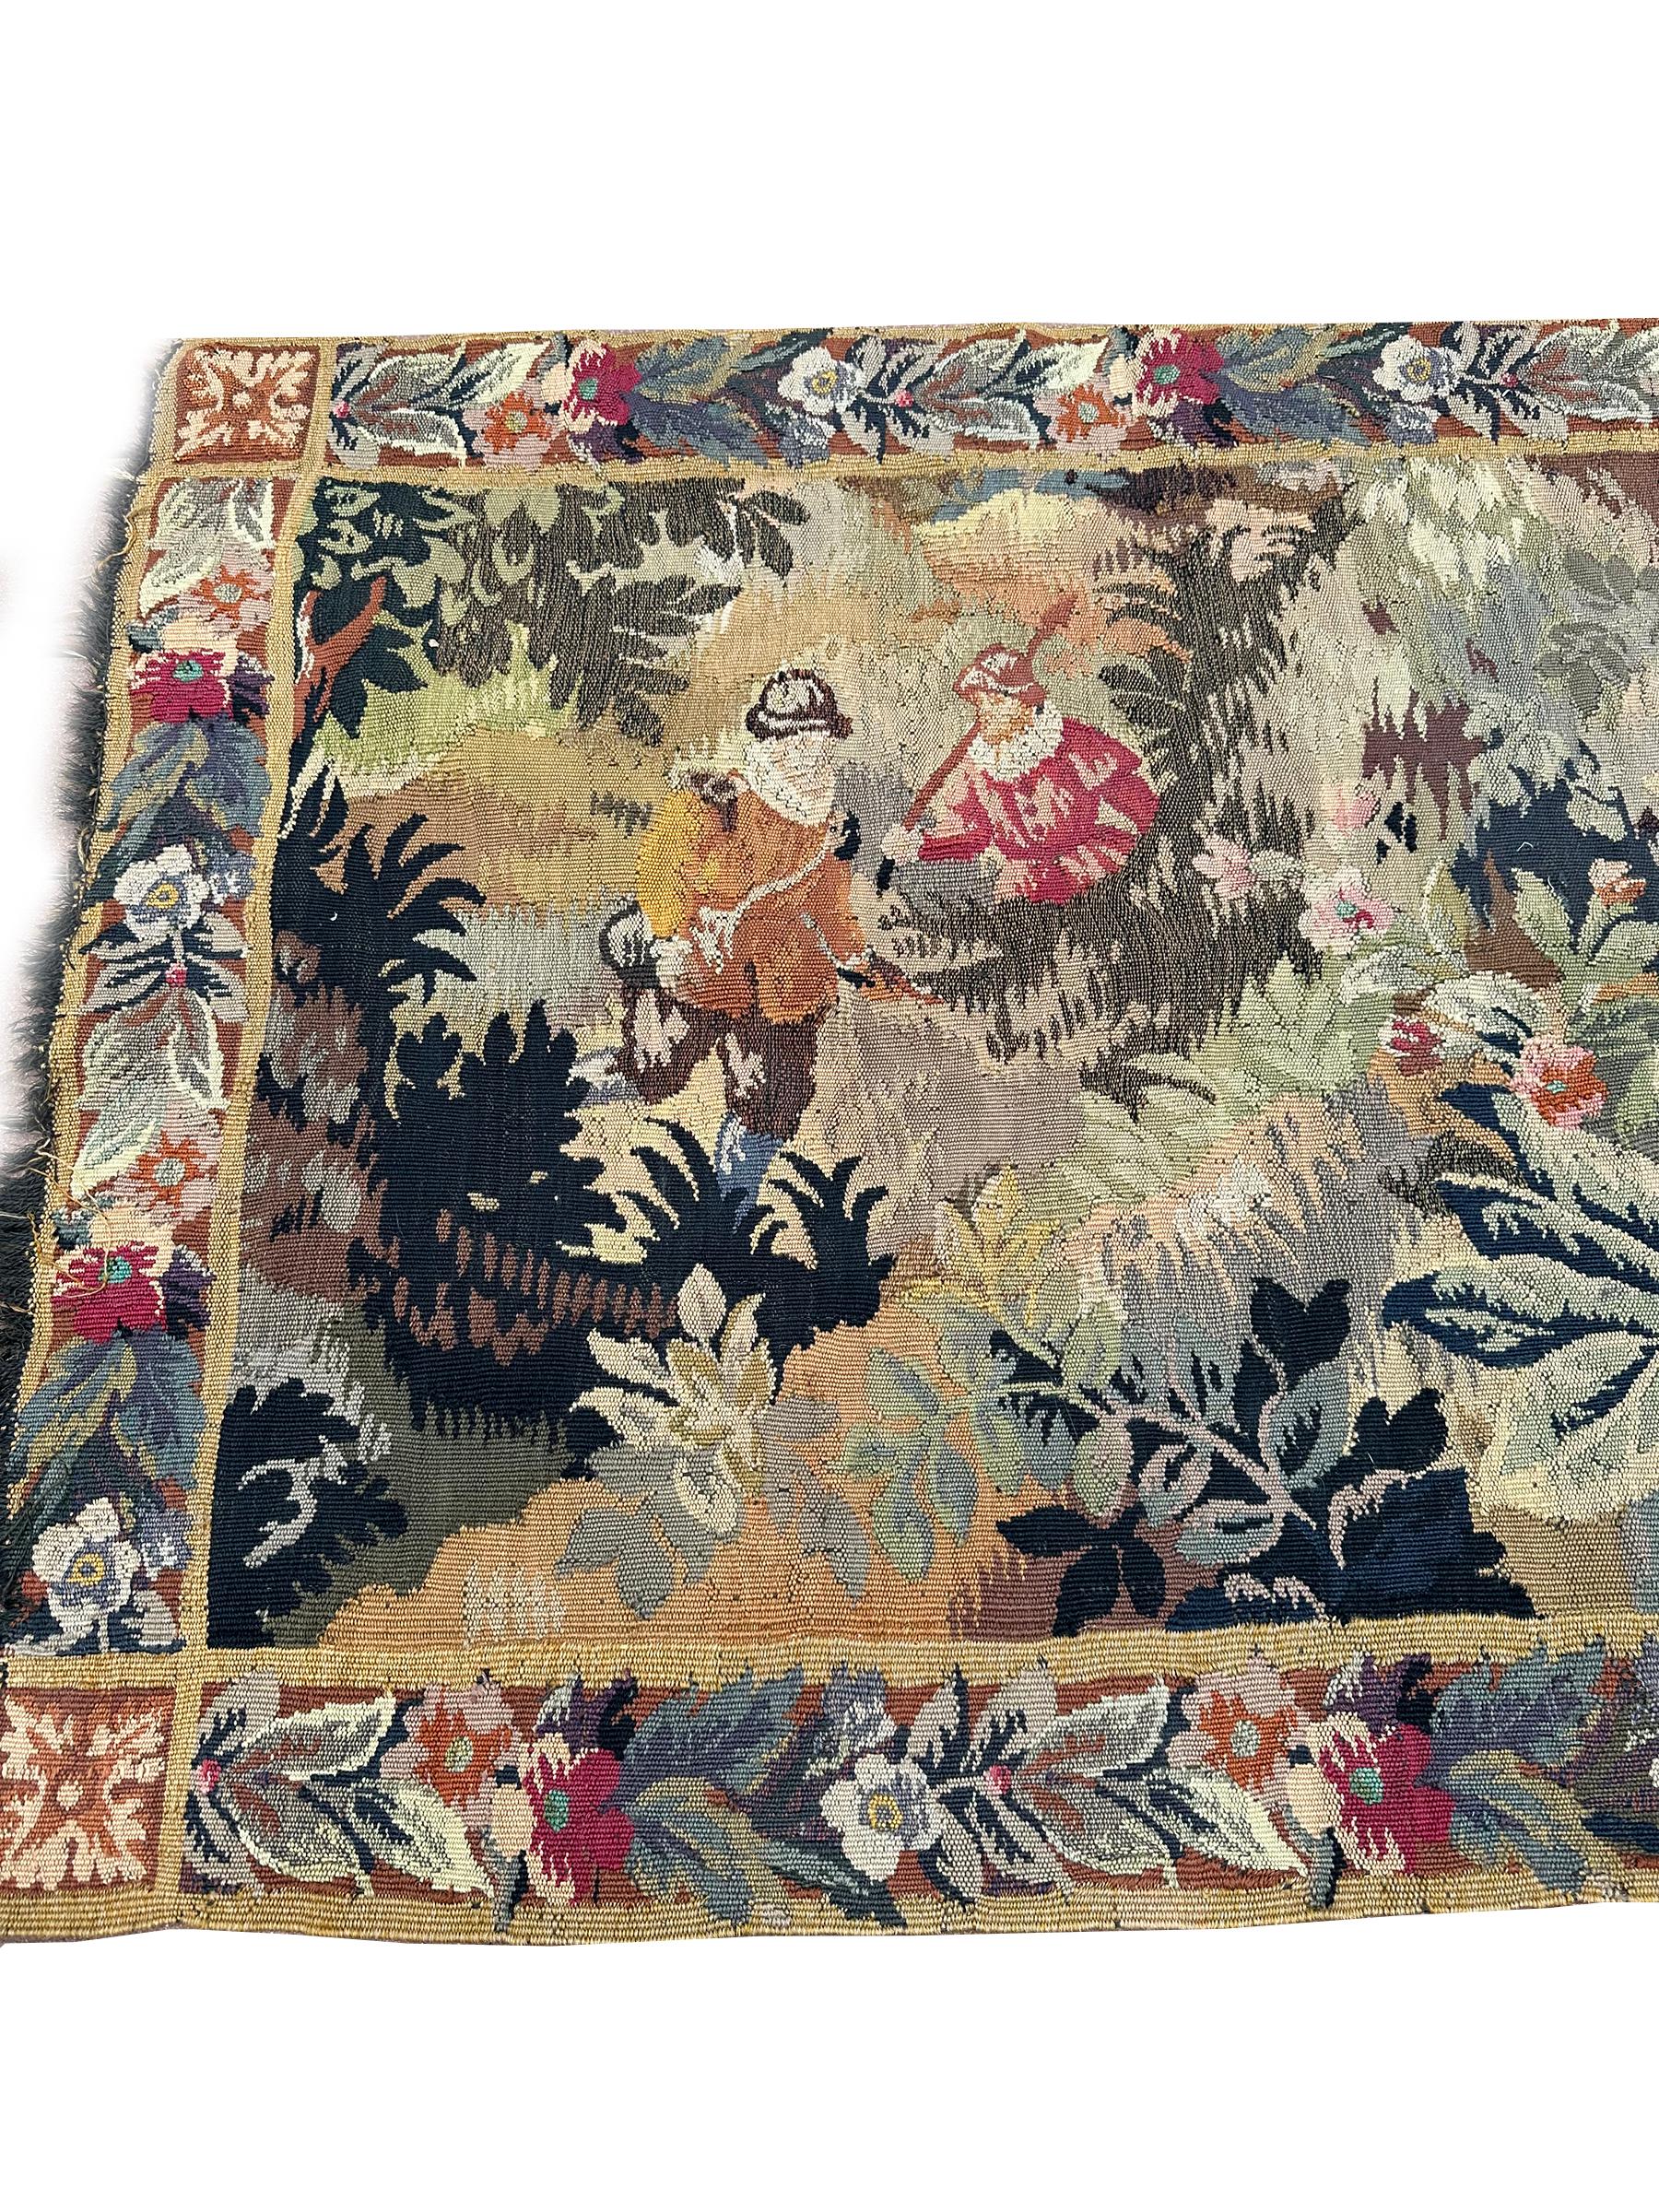 Antique French Tapestry Exotic Flowers Animals Rare Black Verdure 3x6
92cm x 168cm

A magnificent antique French tapestry depicting a scene of verdure. This is an easy, chic addition to any space.